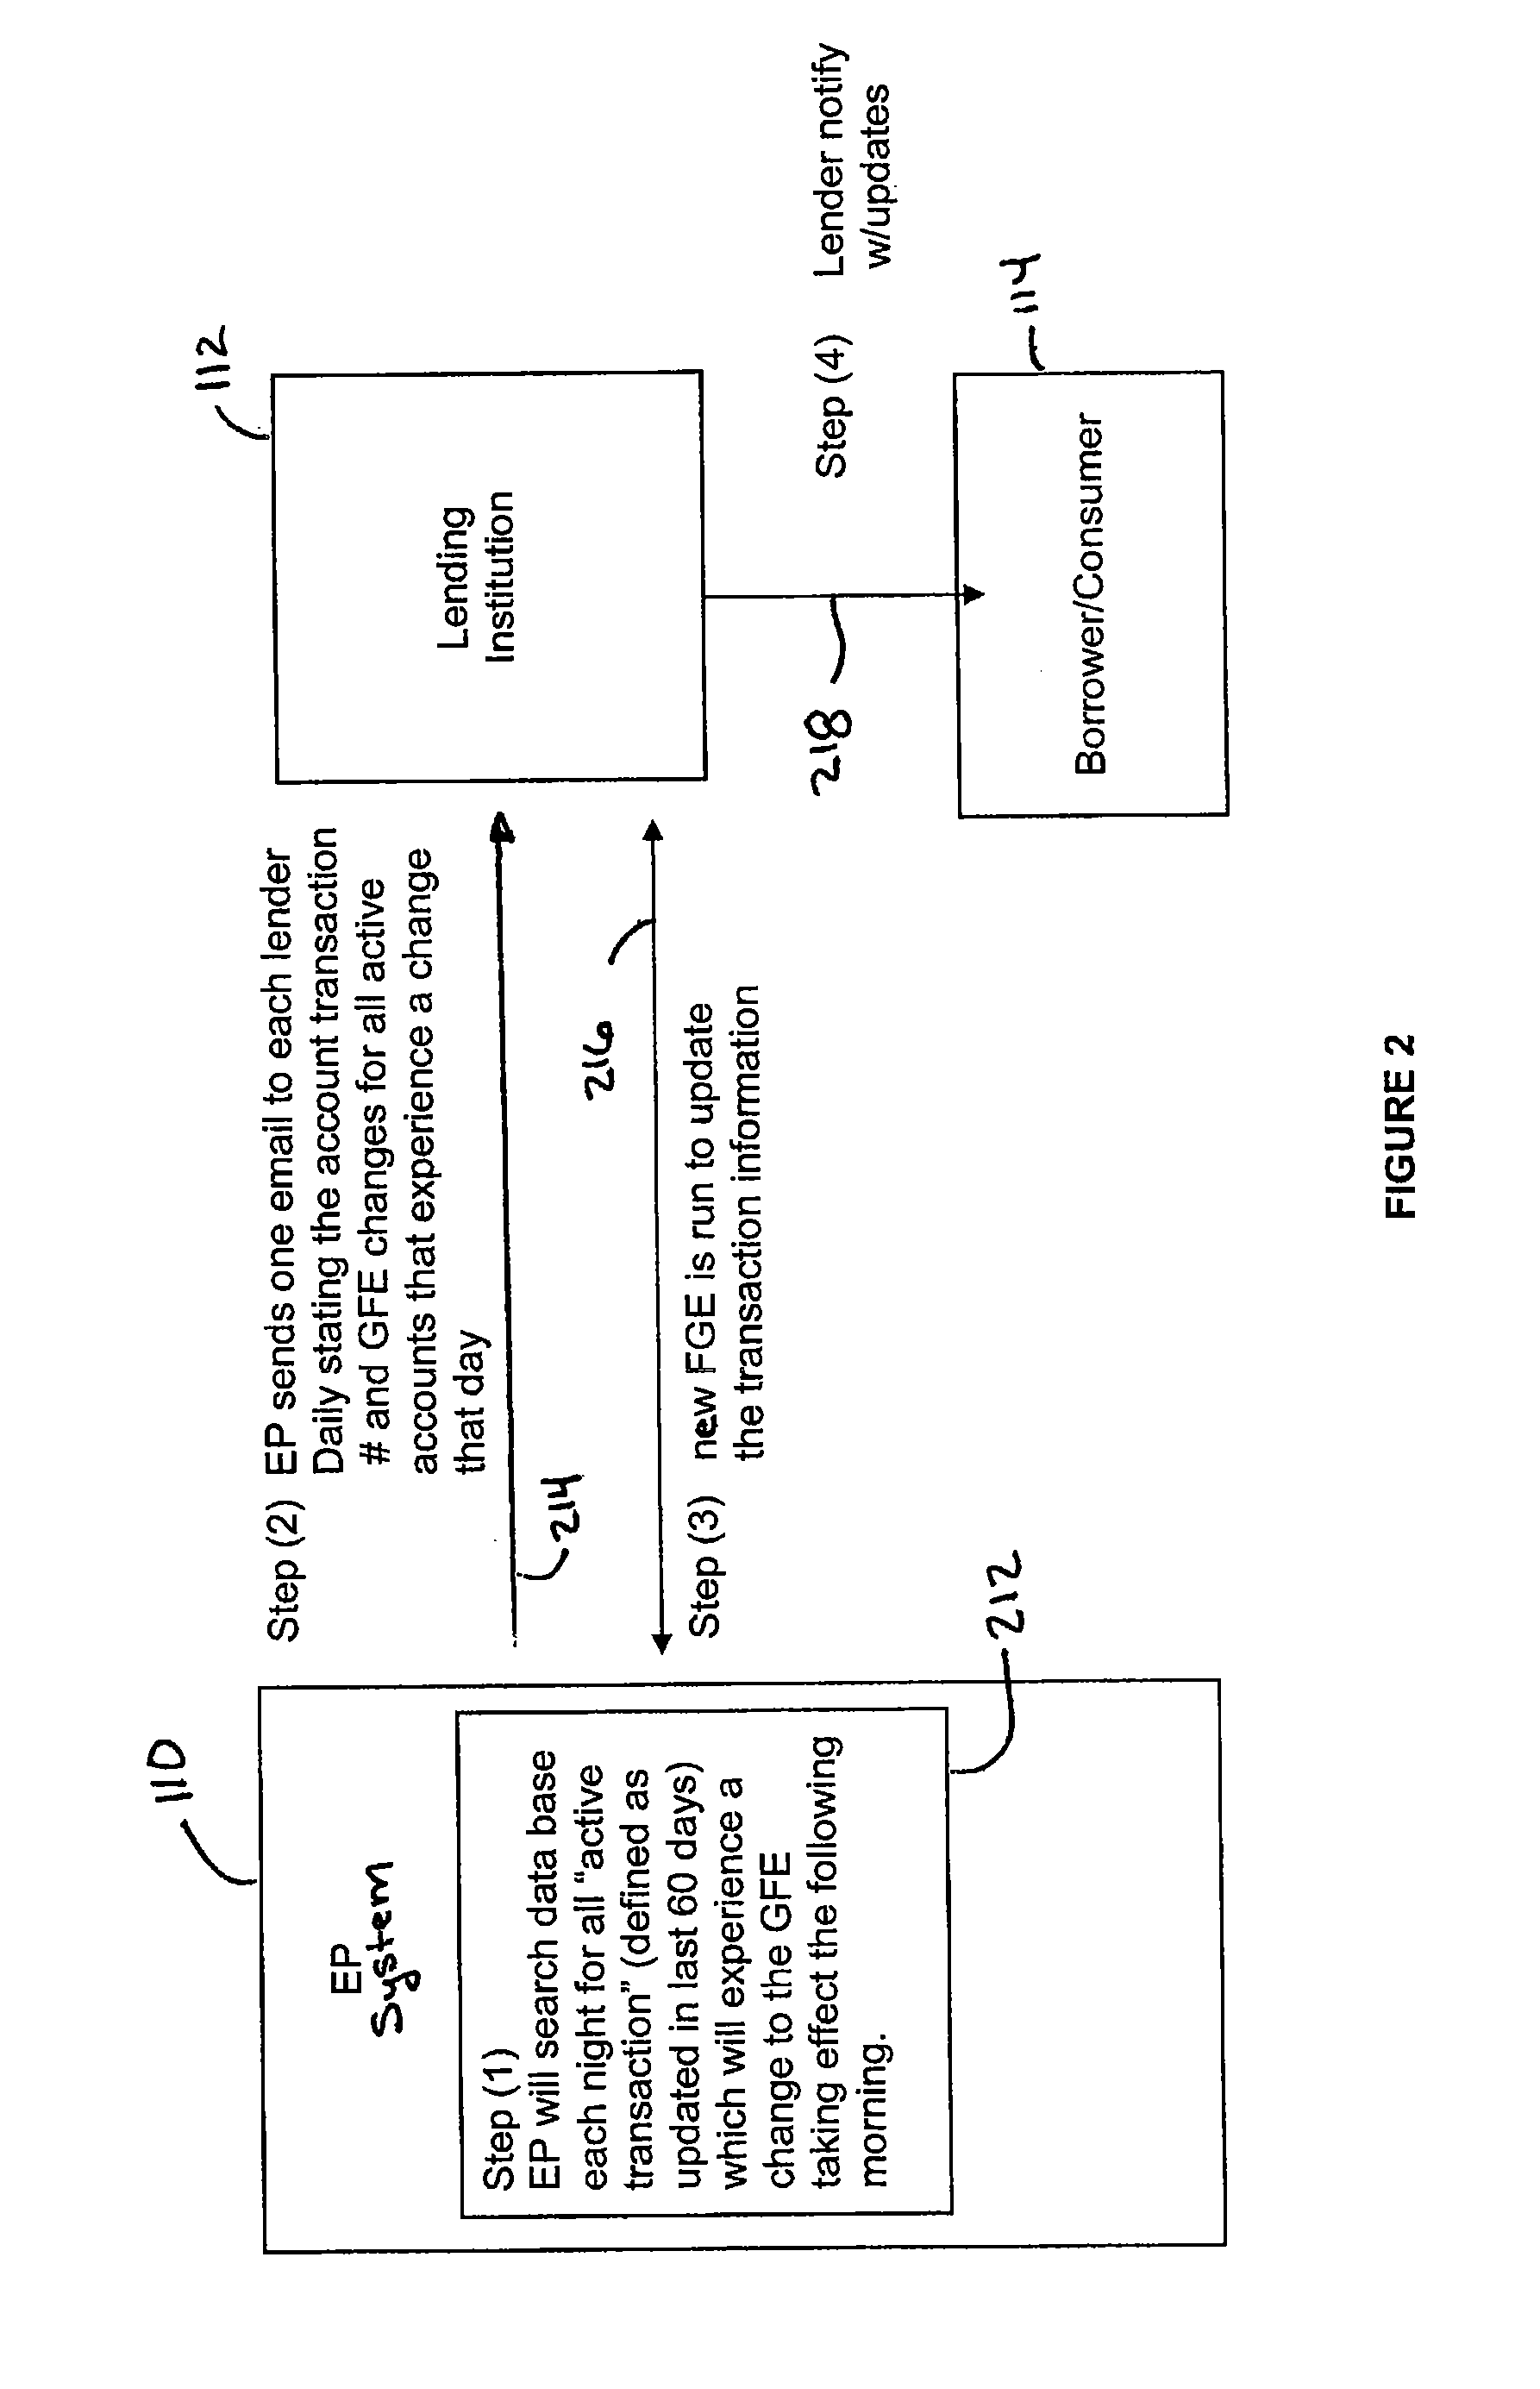 System and method for generating and tracking field values of mortgage forms